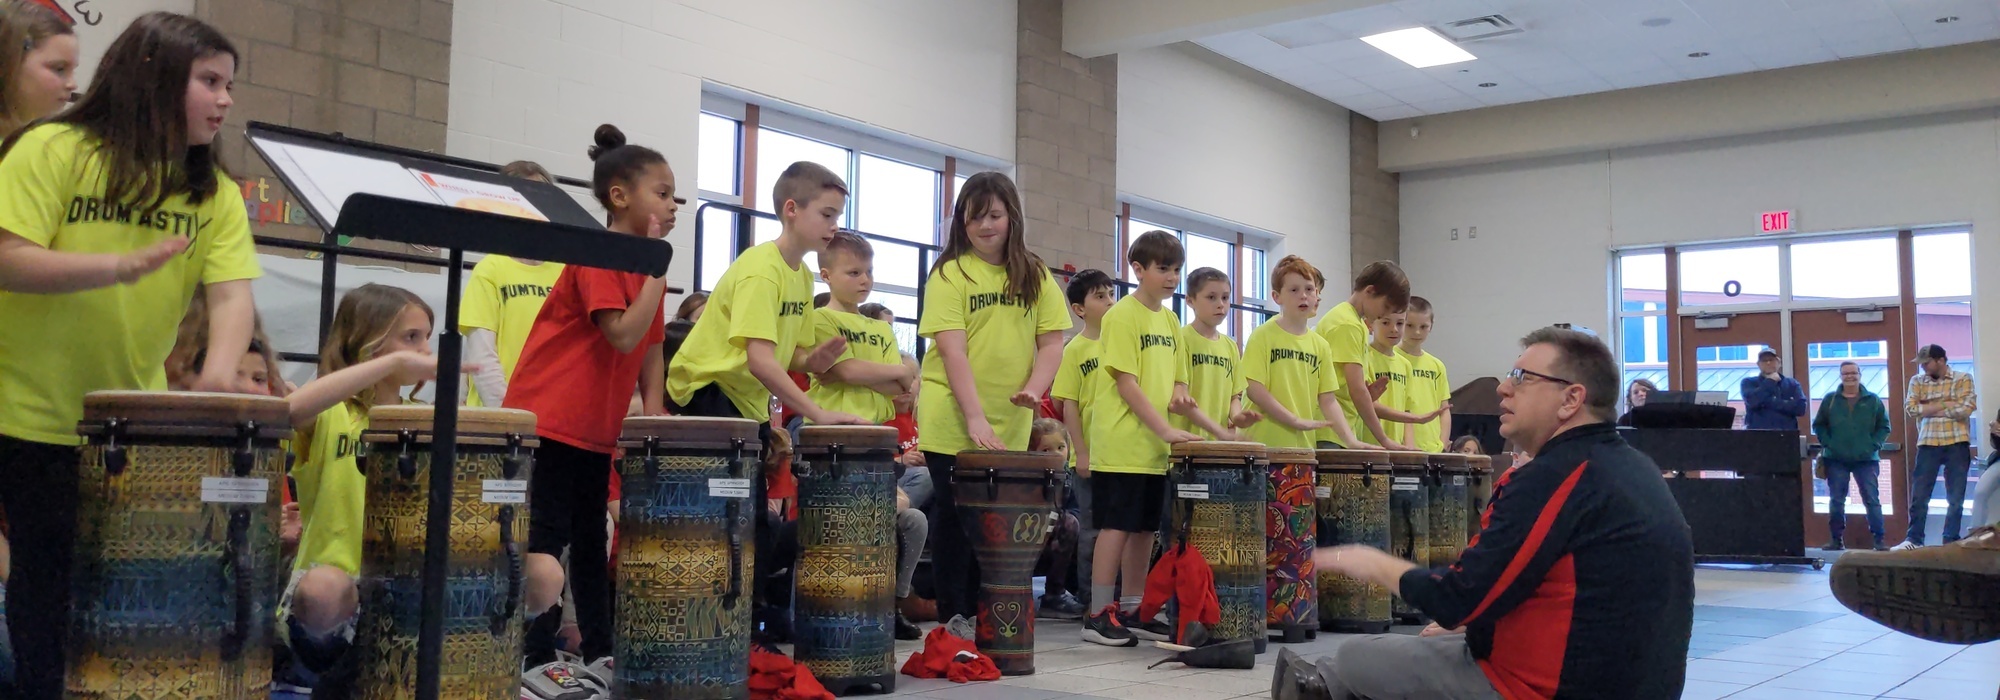 Elementary students playing drums